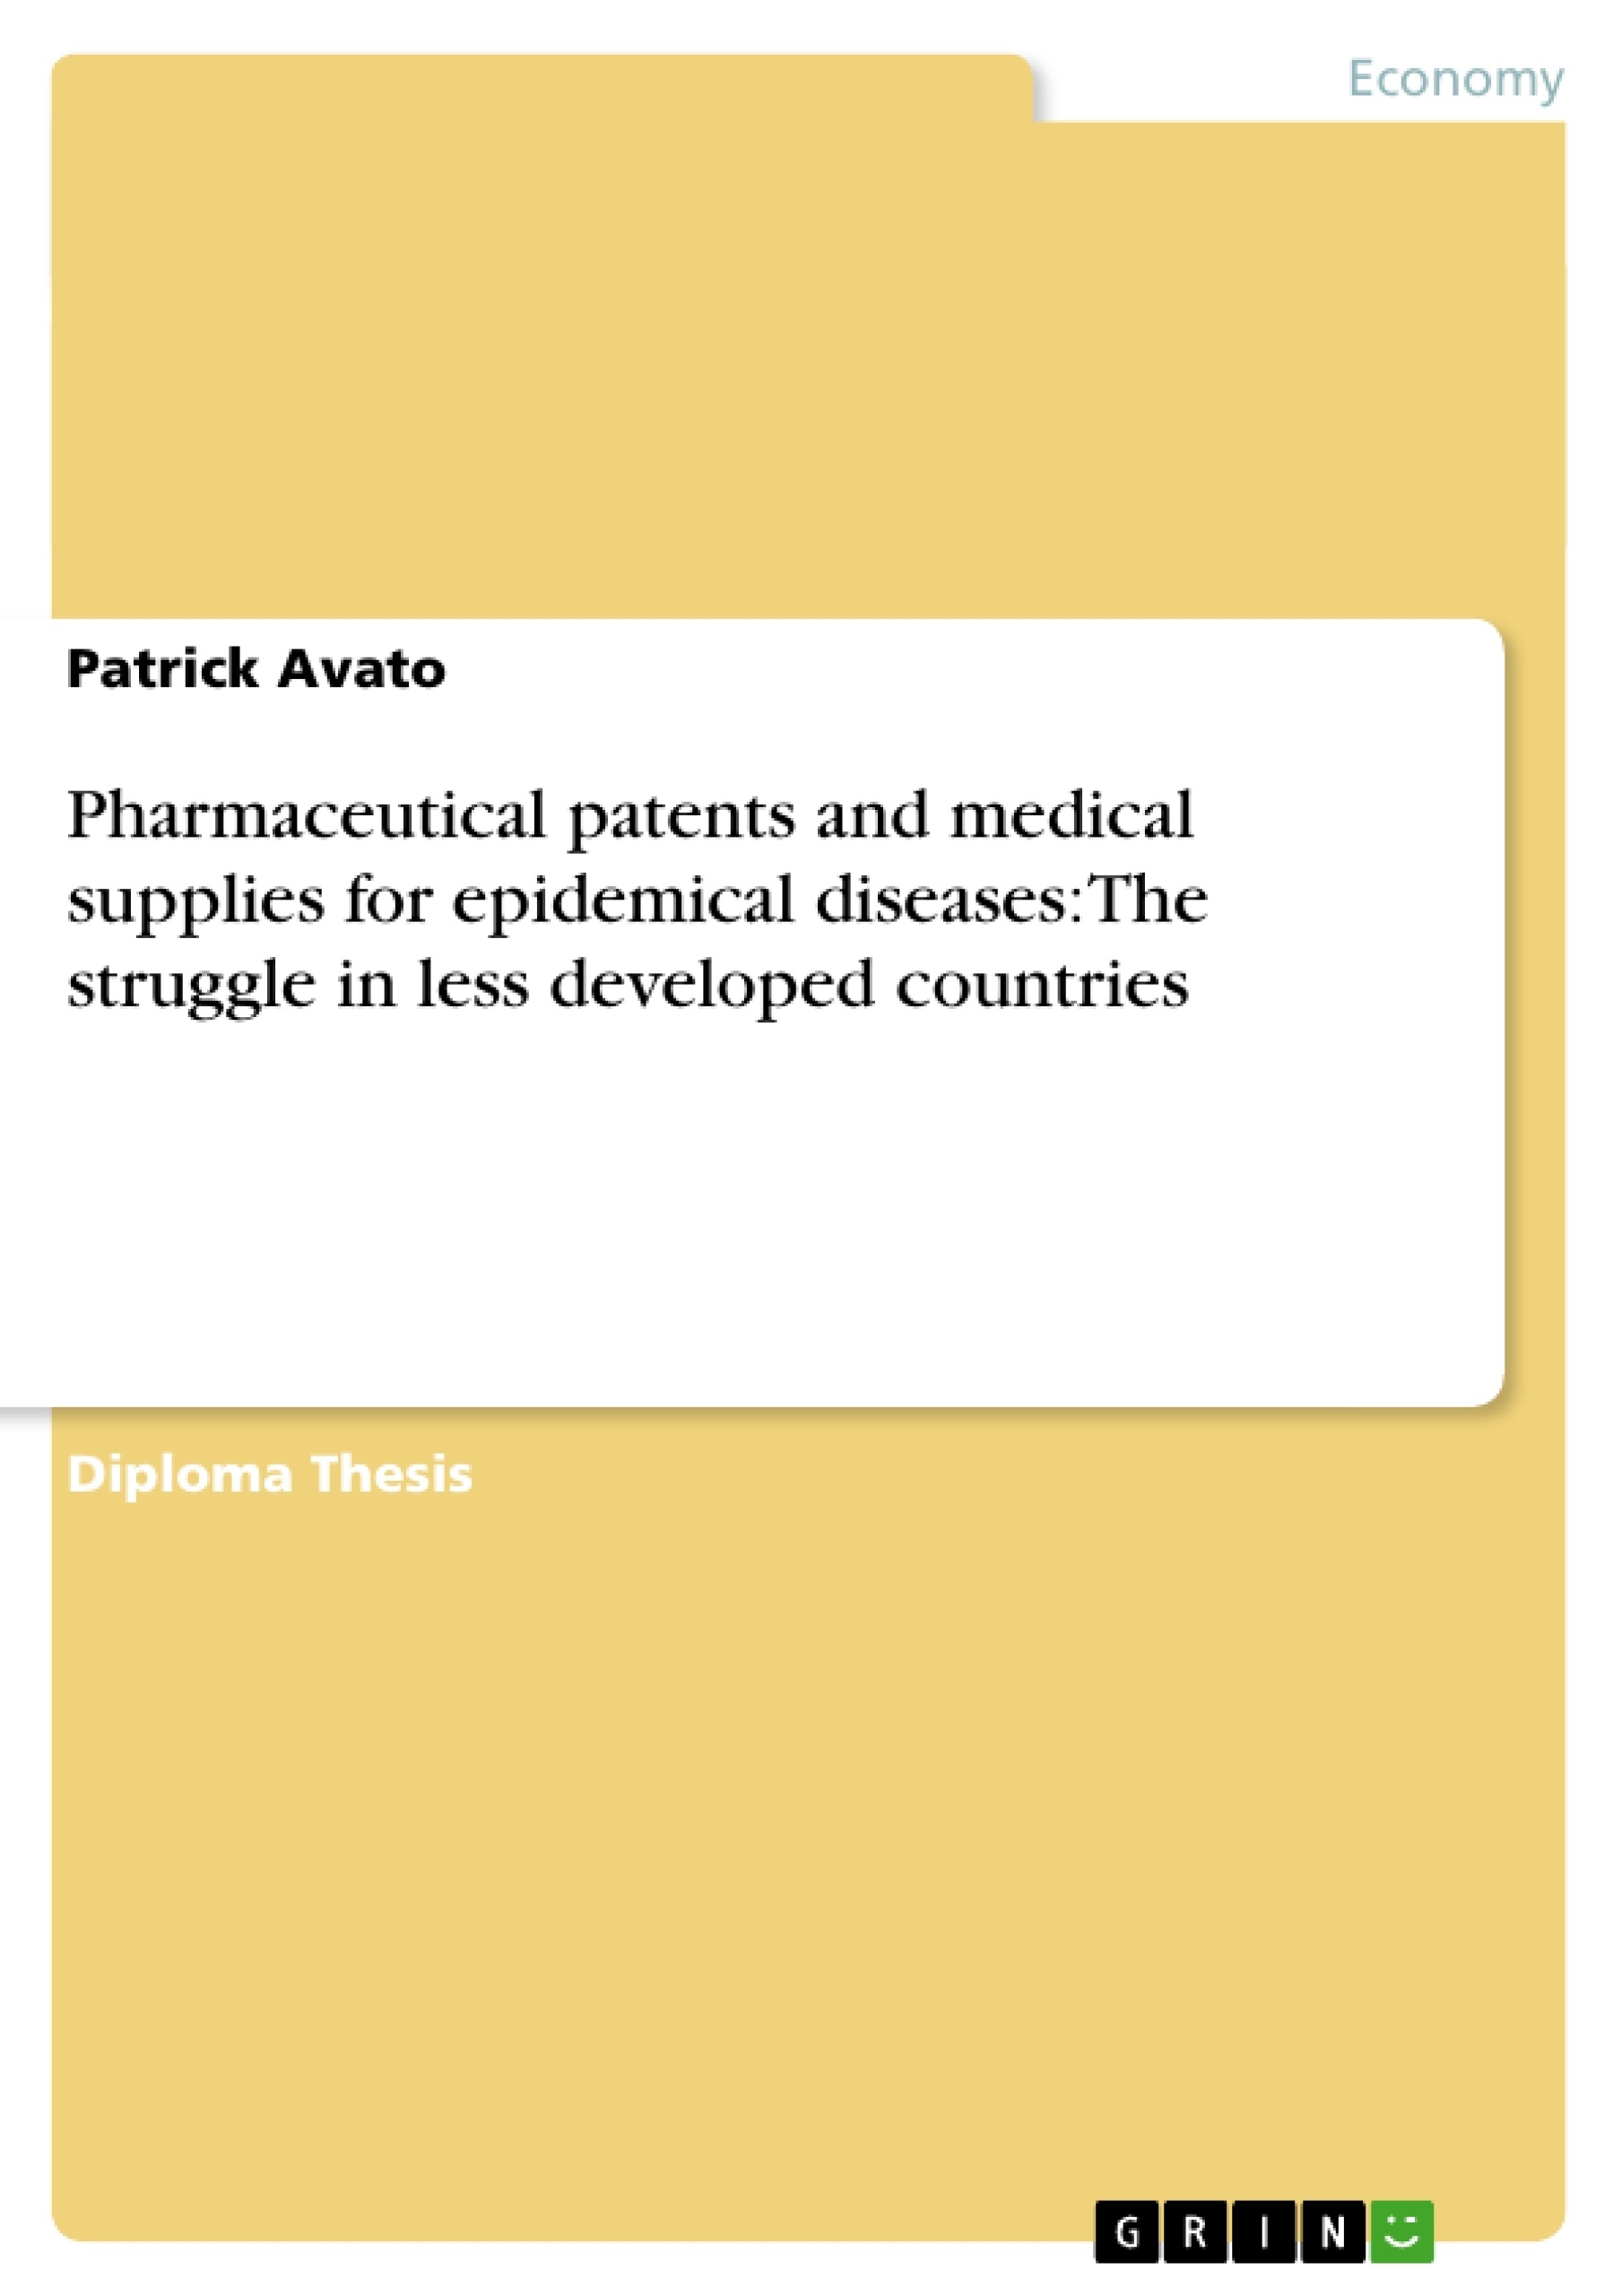 Title: Pharmaceutical patents and medical supplies for epidemical diseases: The struggle in less developed countries